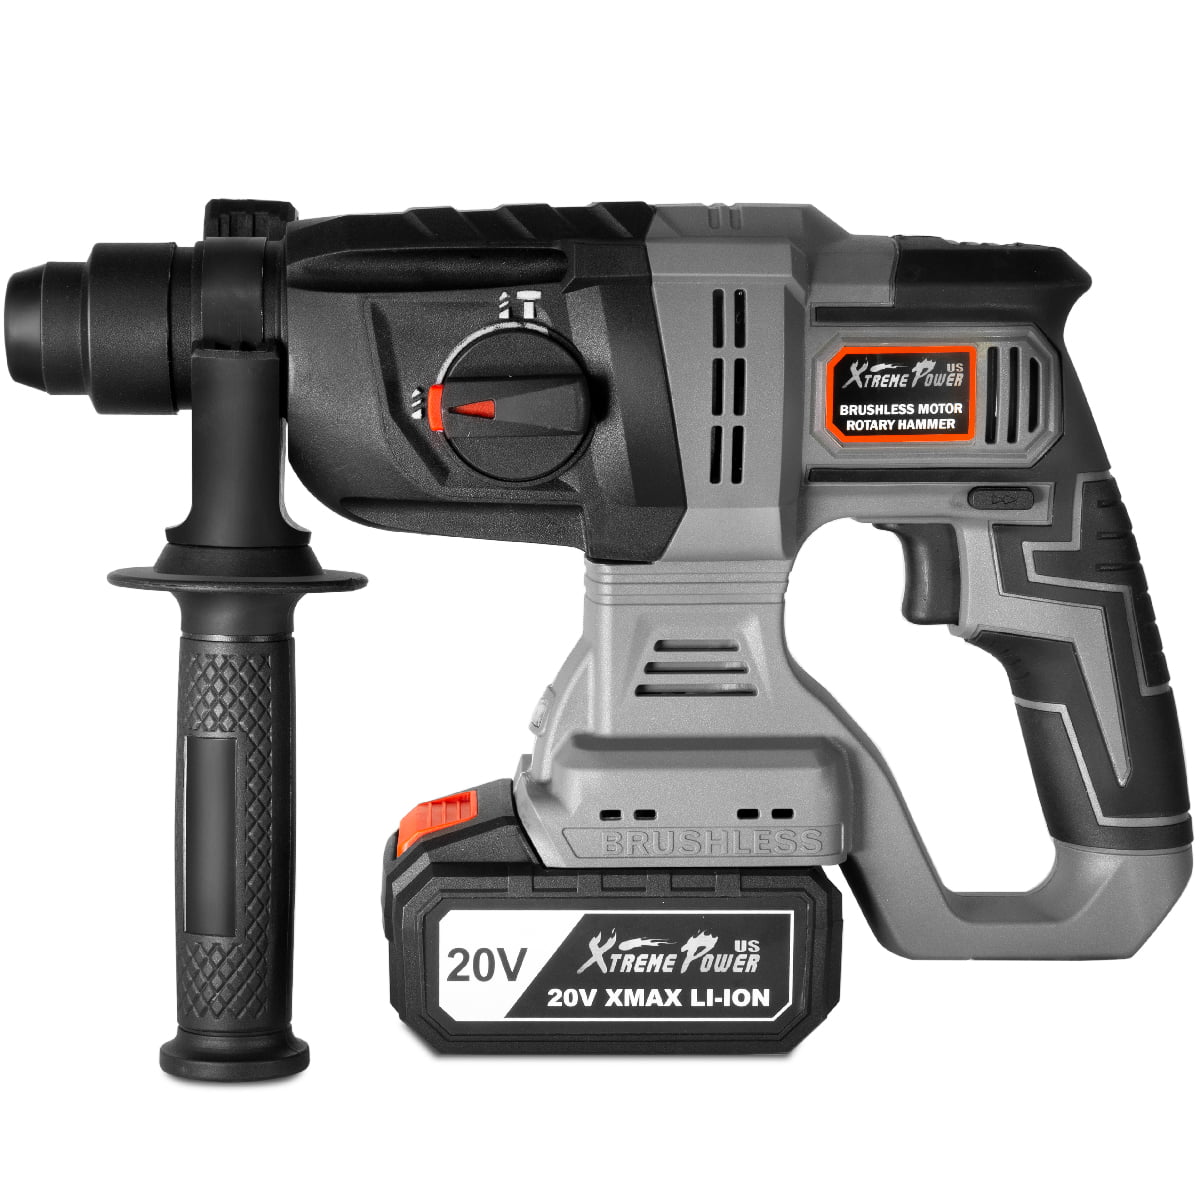 20V-Max Cordless SDS-Plus Rotary Hammer Drill 2.2J Drilling with Carrying Bag 